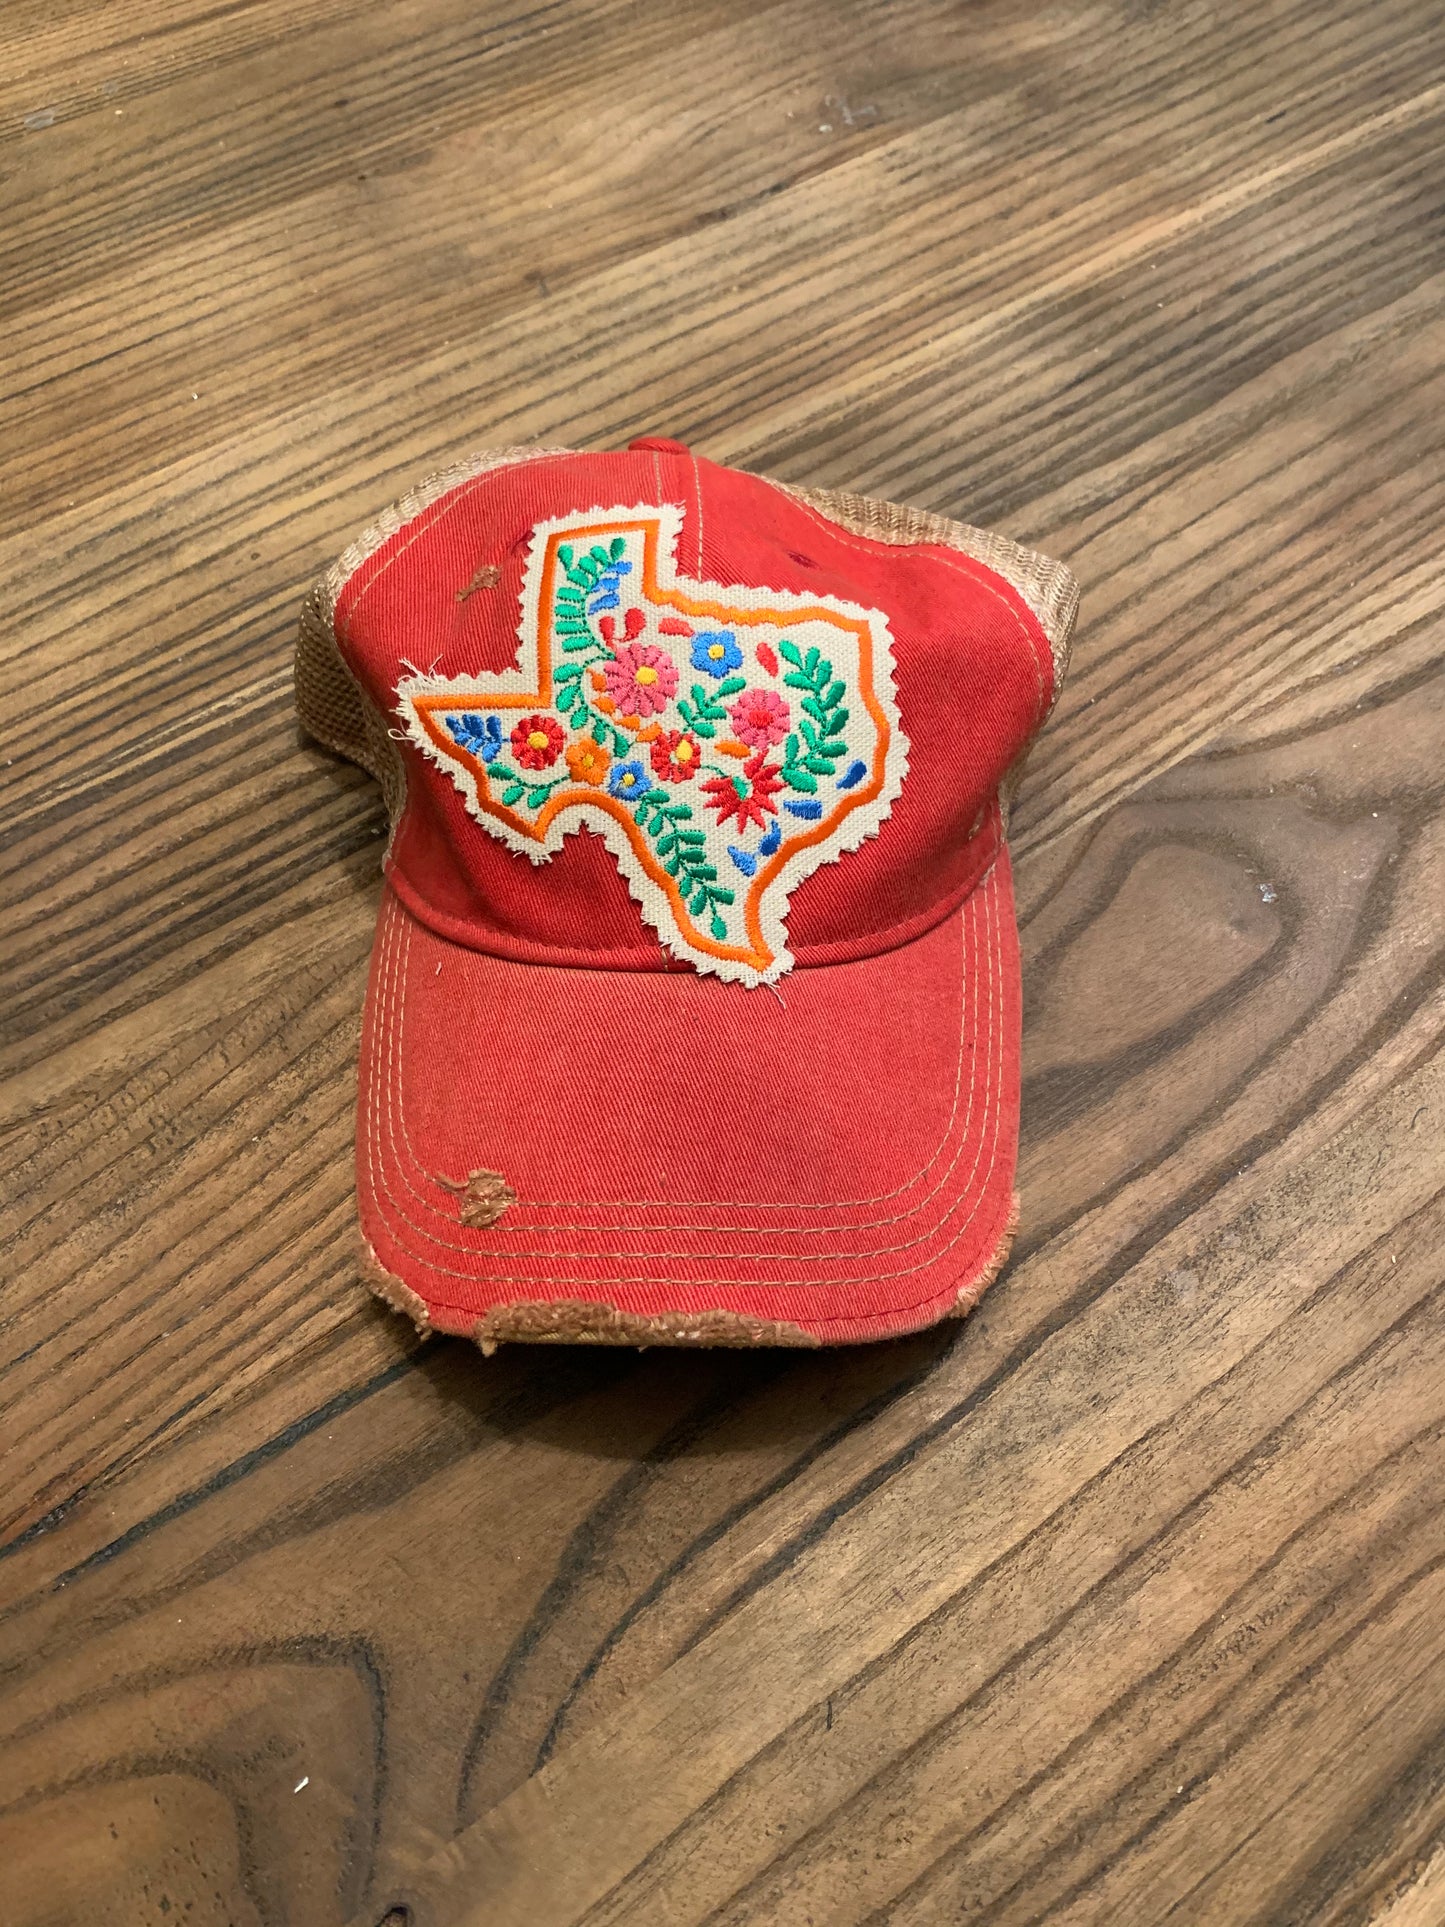 Texas Floral Patch on Vintage Red Hat